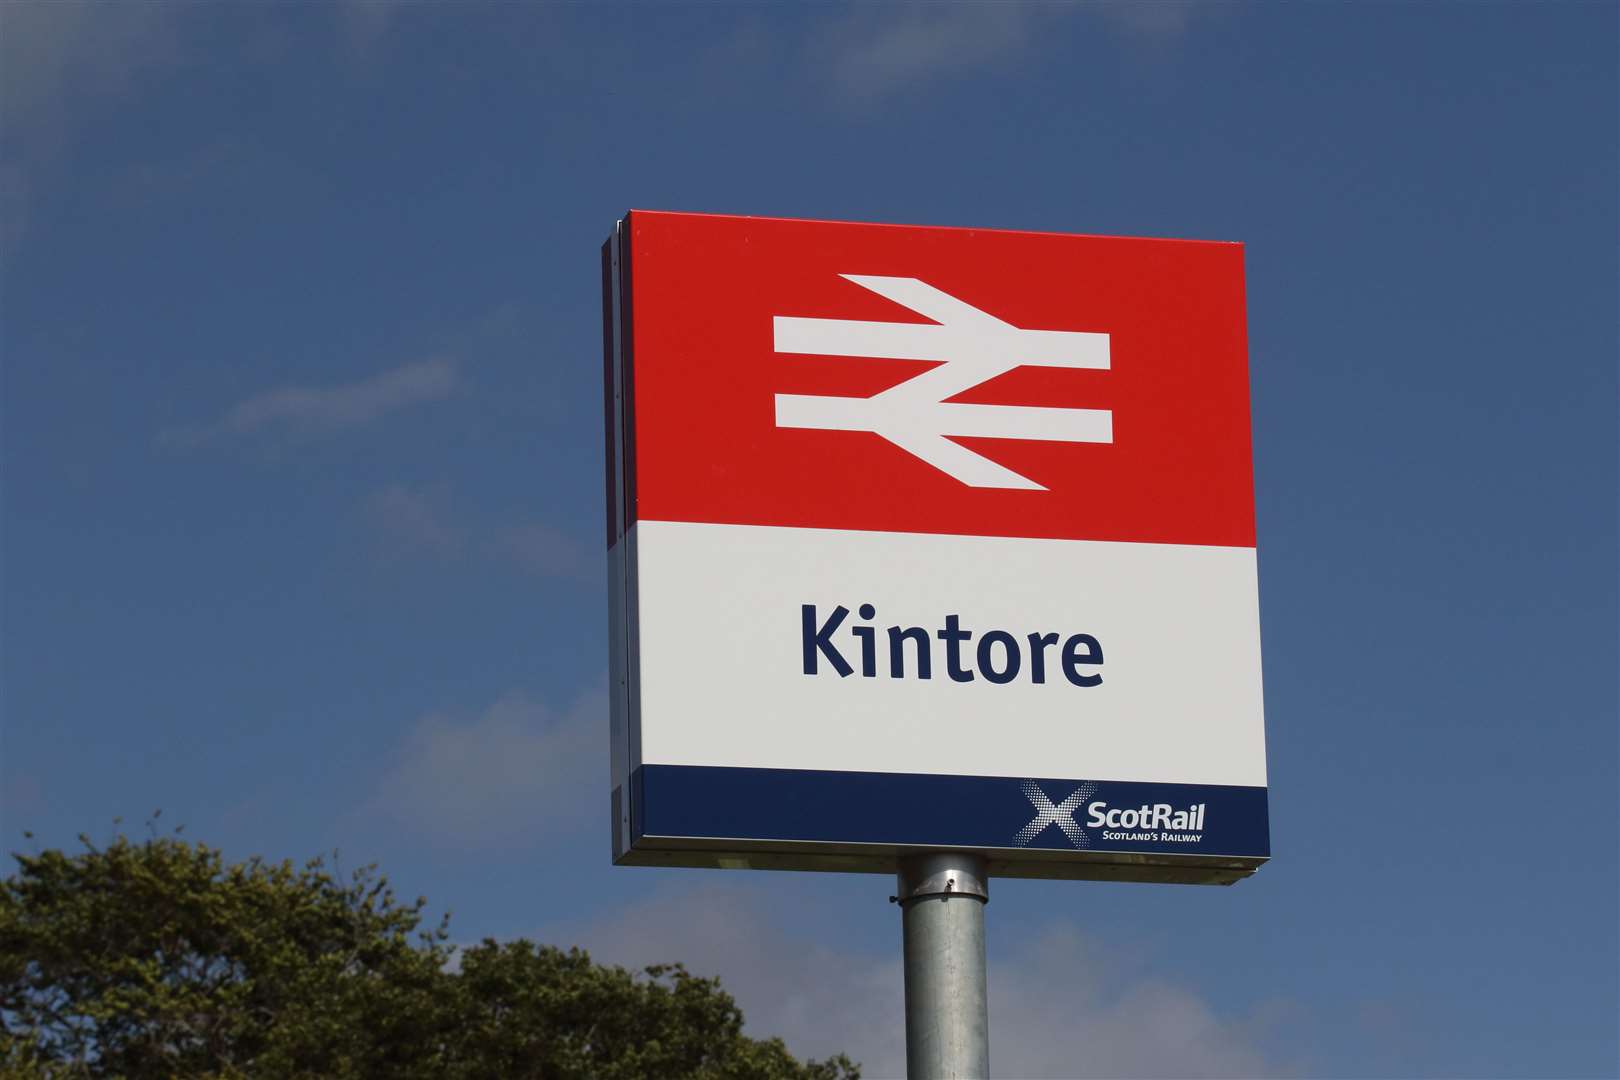 Kintore Train Station is set to welcome passengers from next week